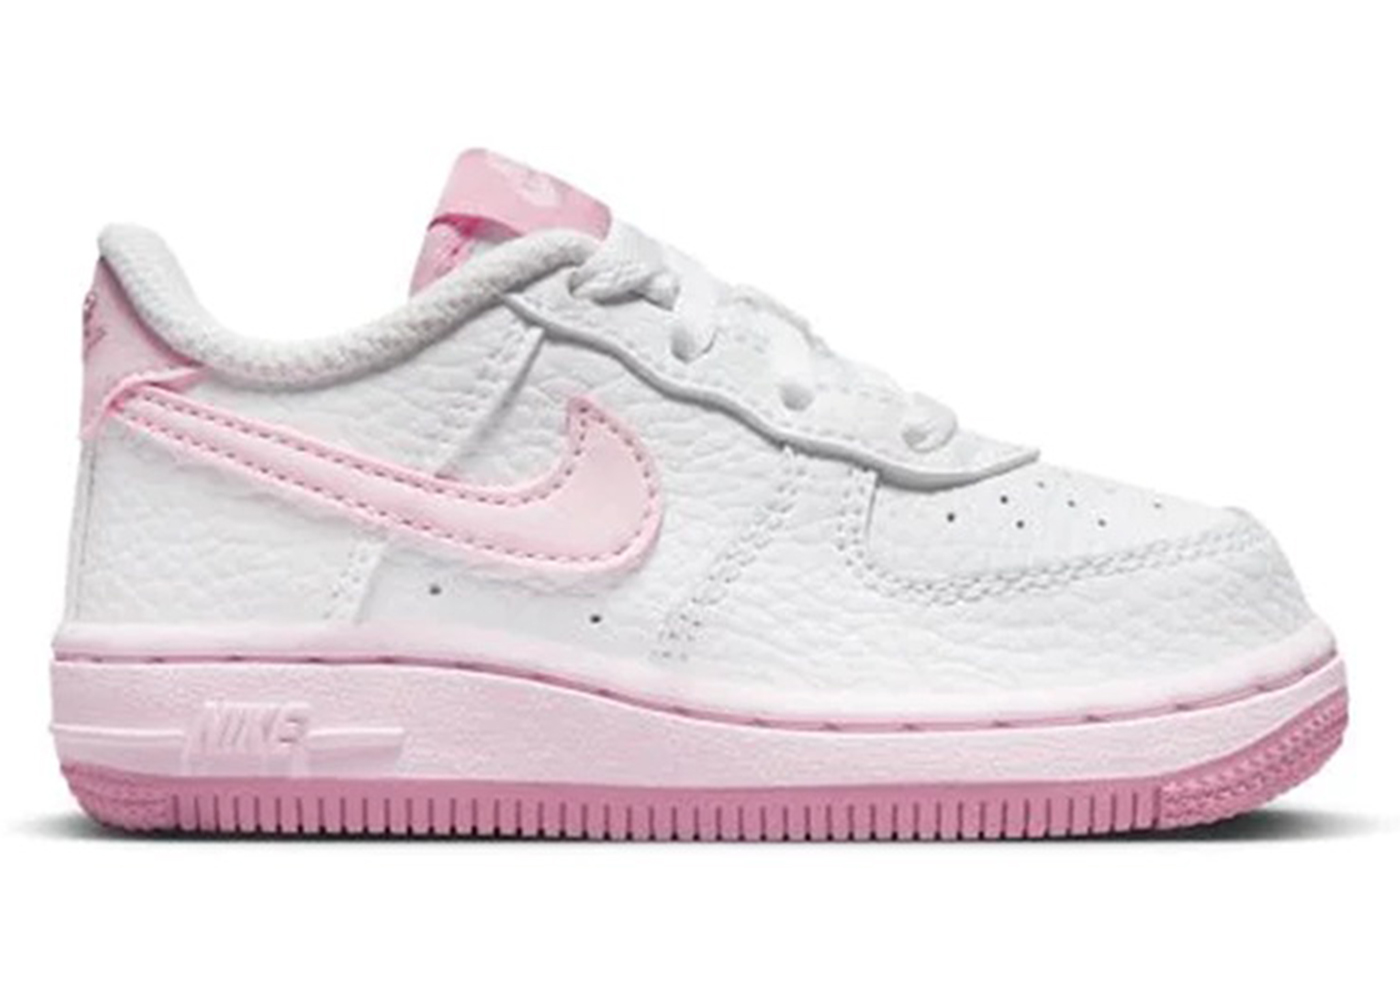 nike air force 1 low white pink他でも出品している為